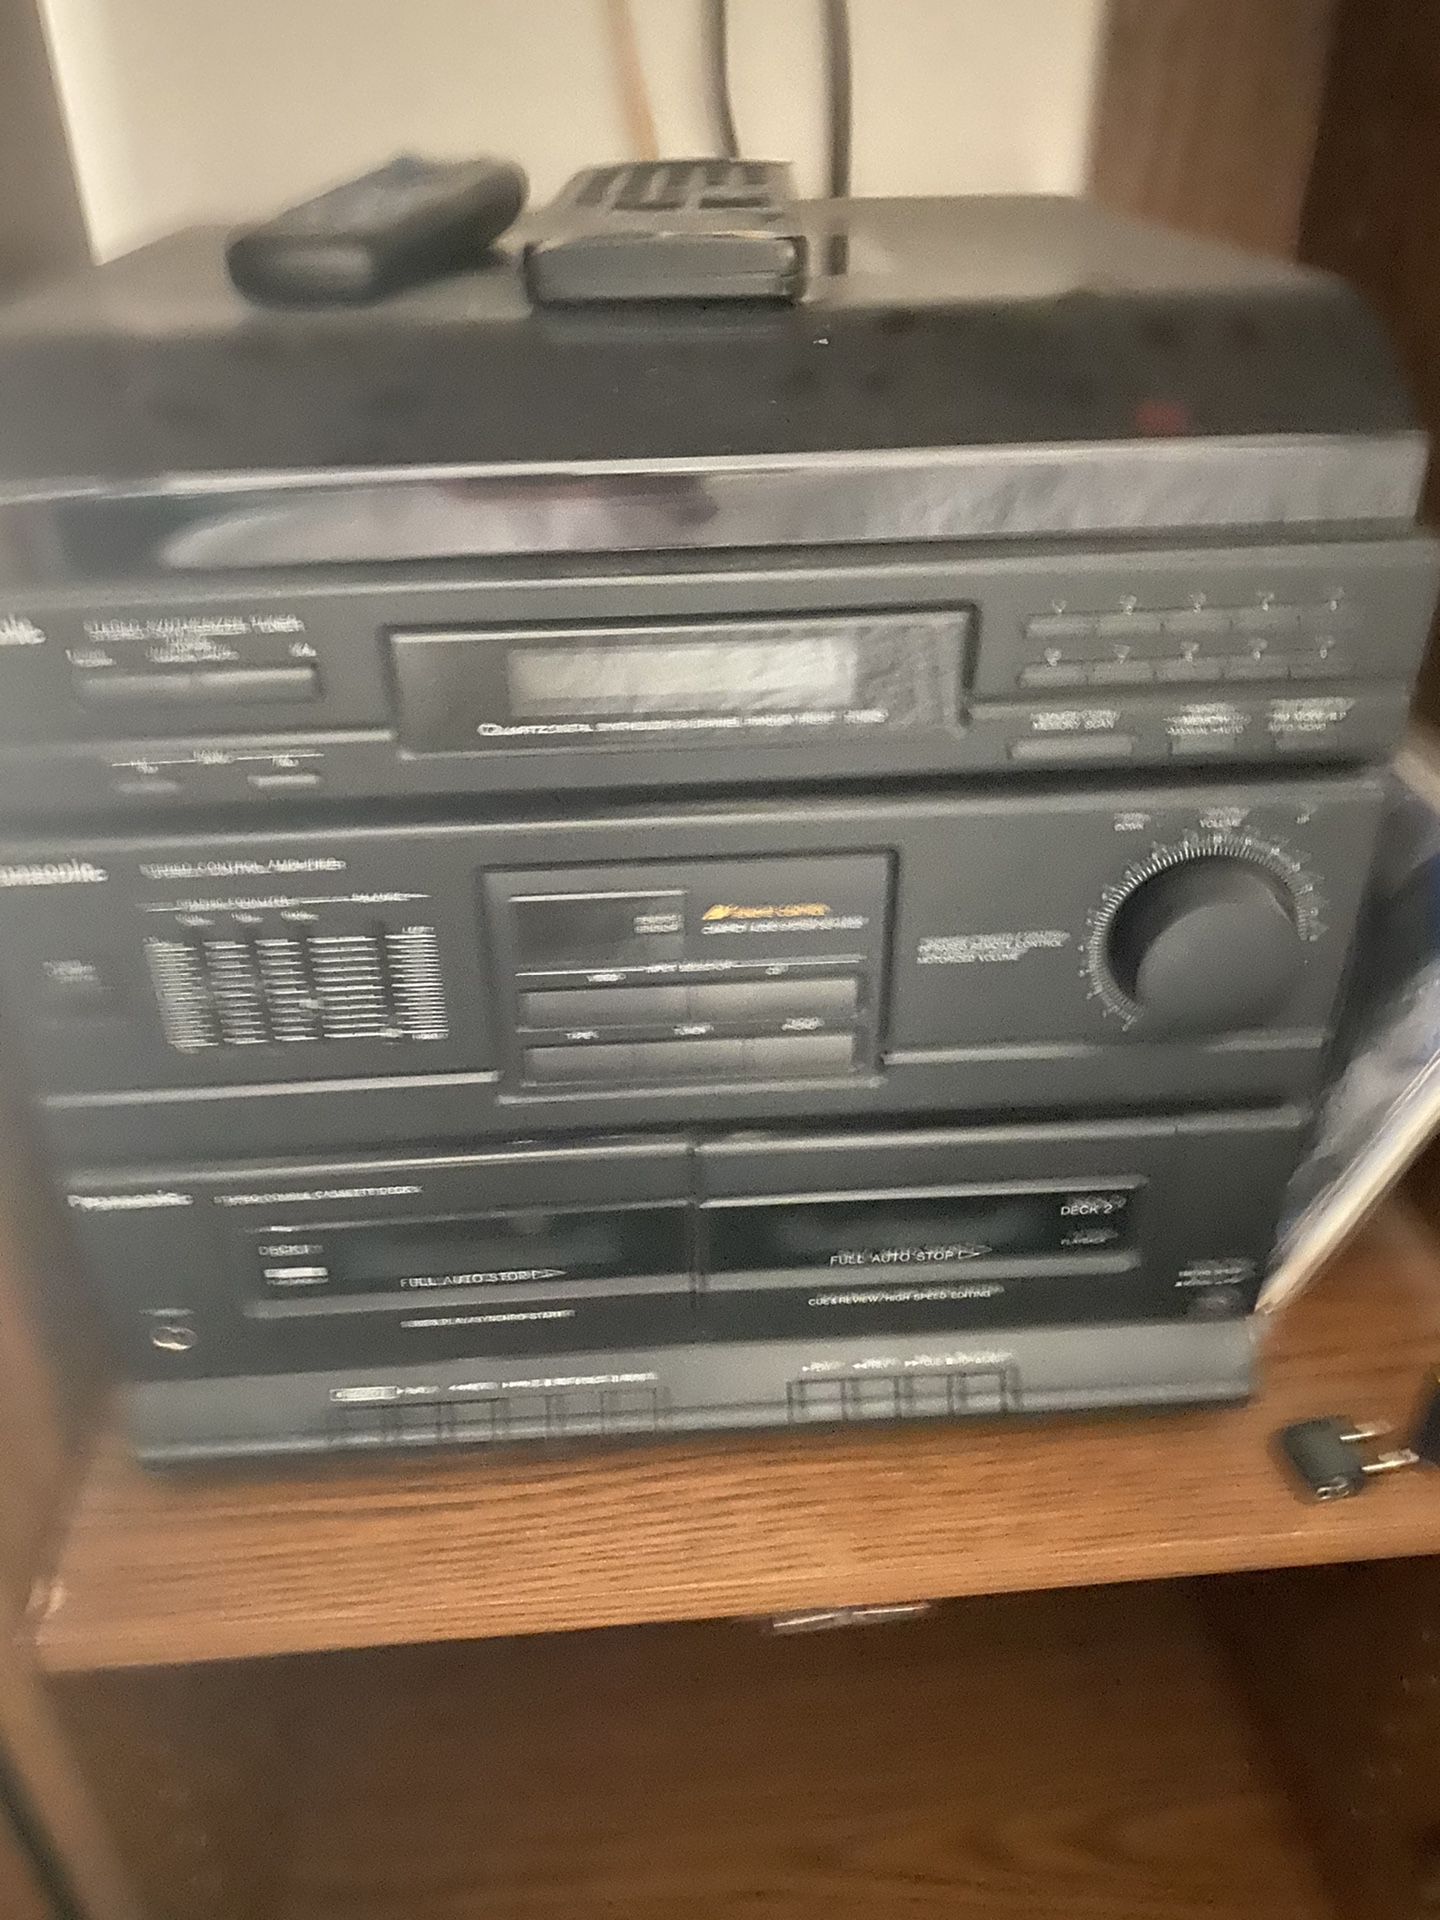 Panasonic Stereo With Cabinet